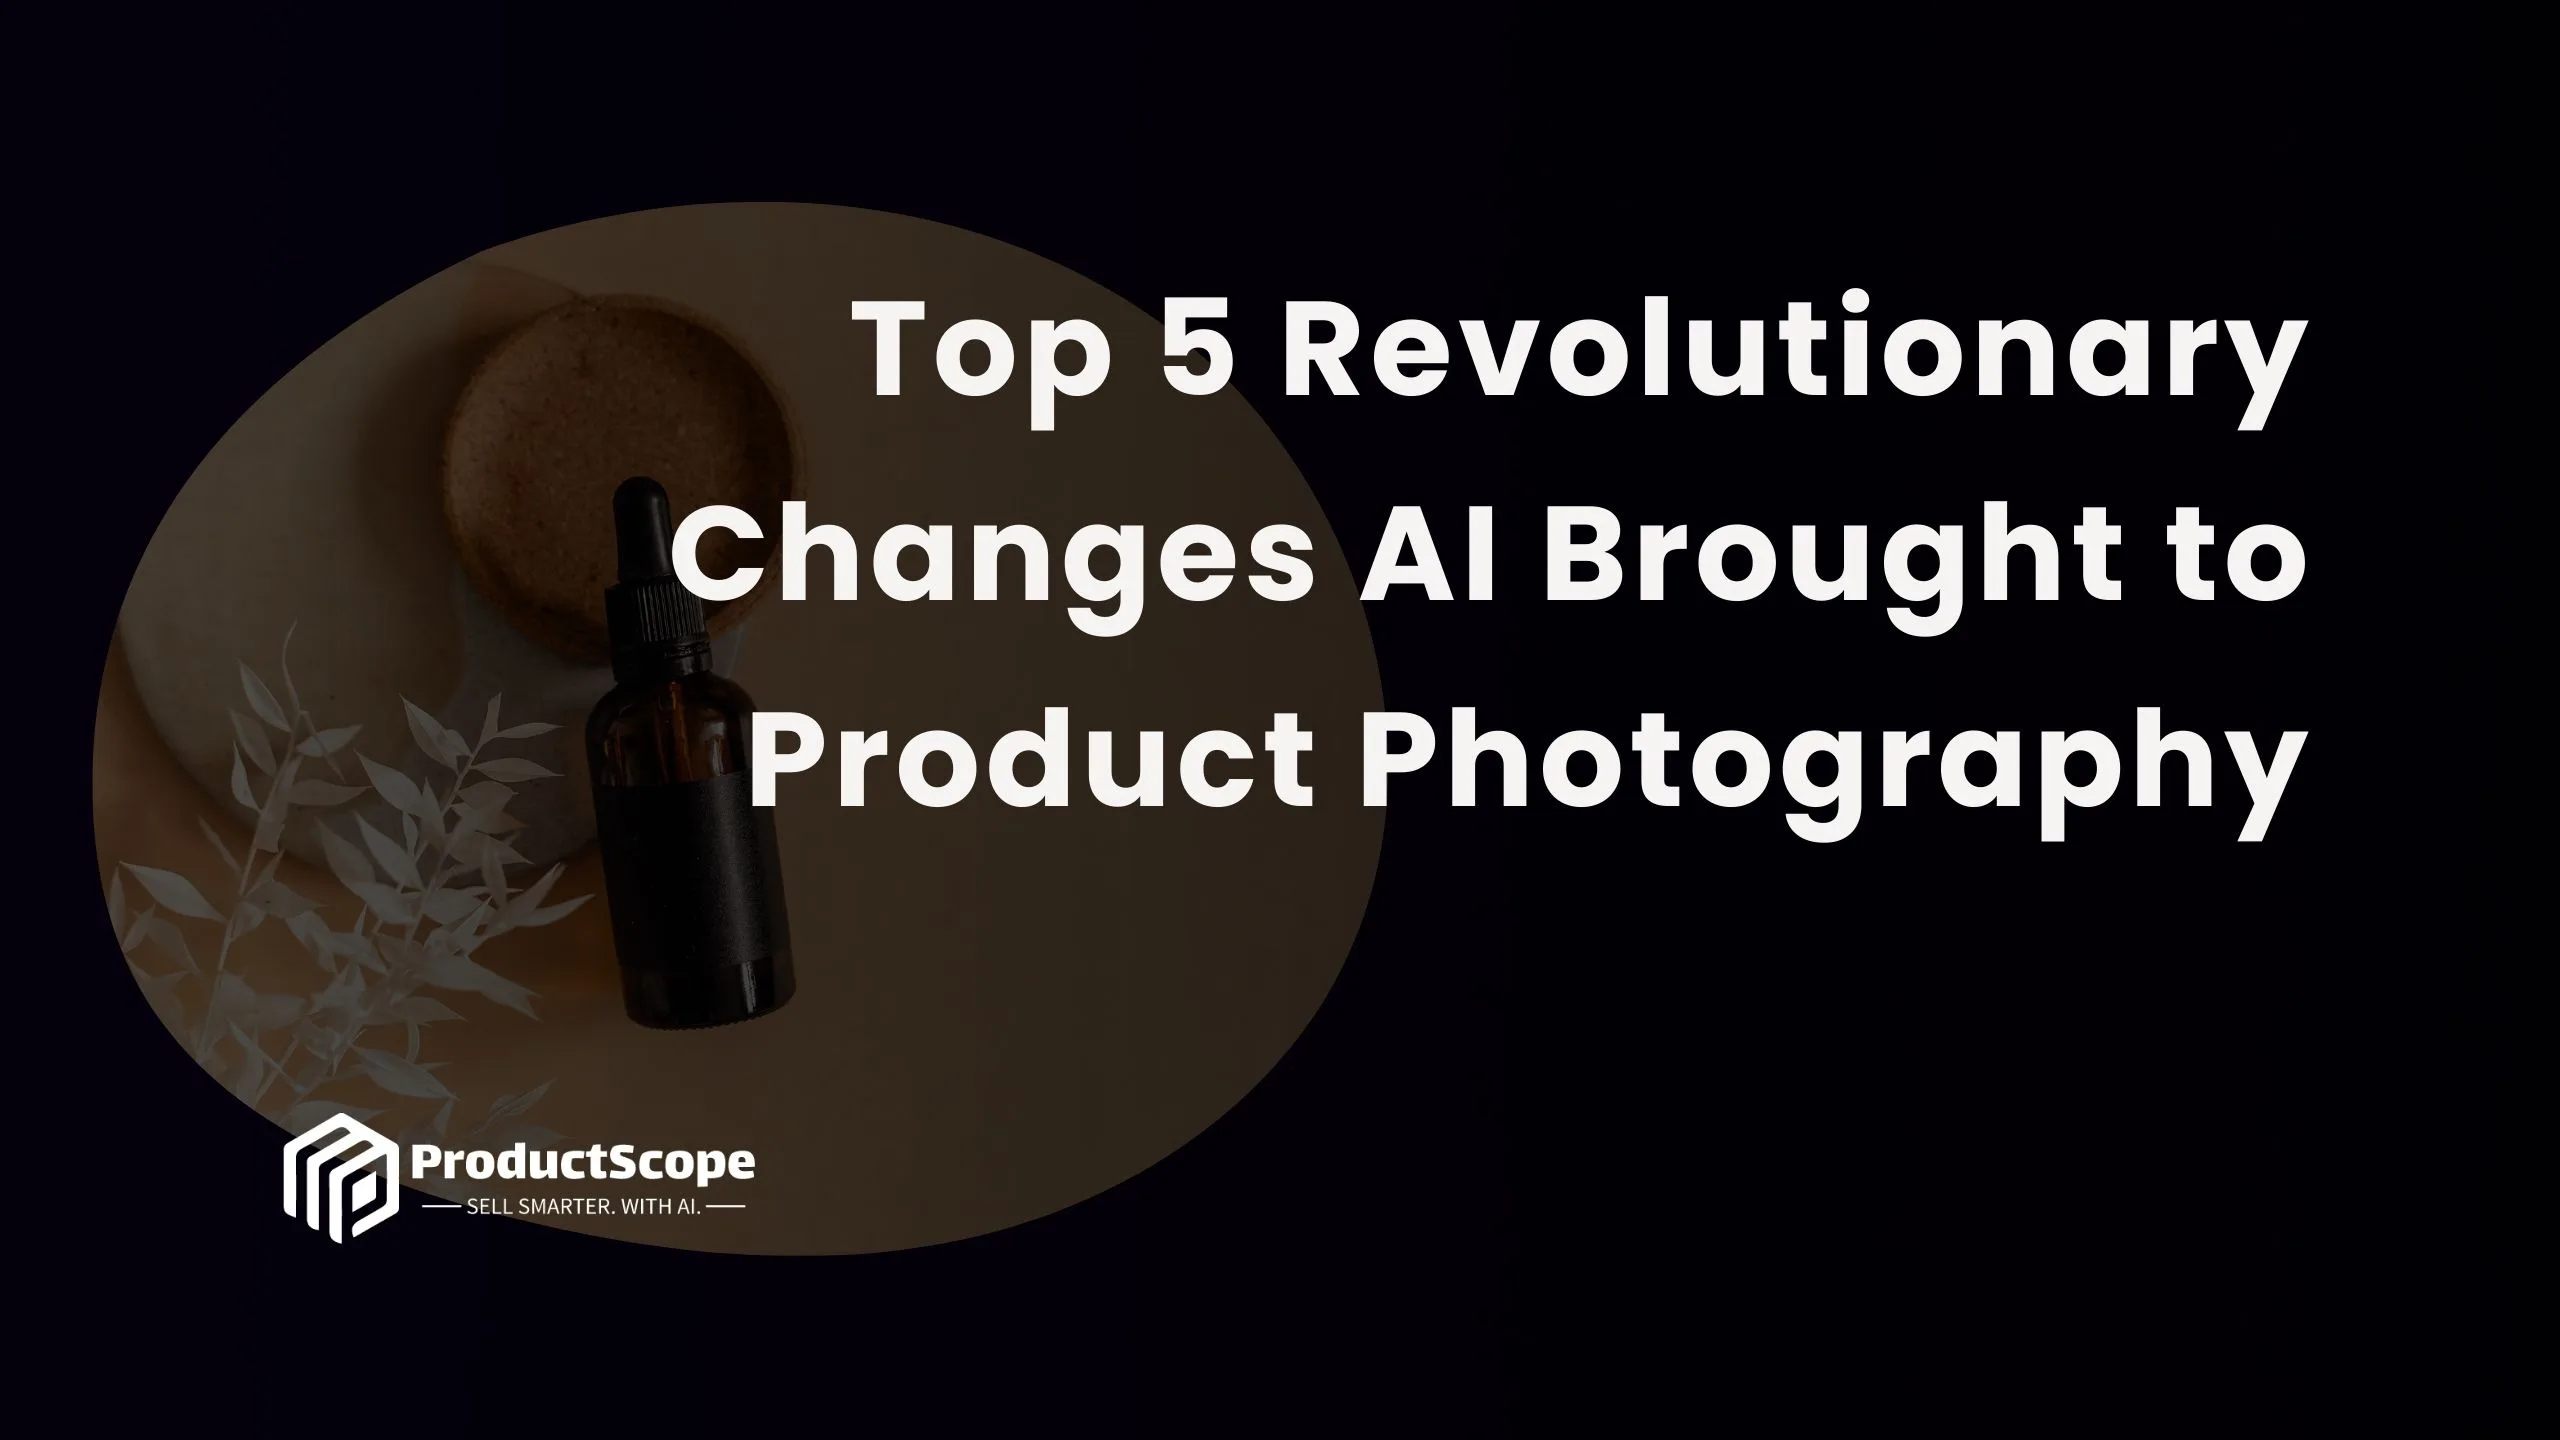 Top 5 Revolutionary Changes AI Brought to Product Photography